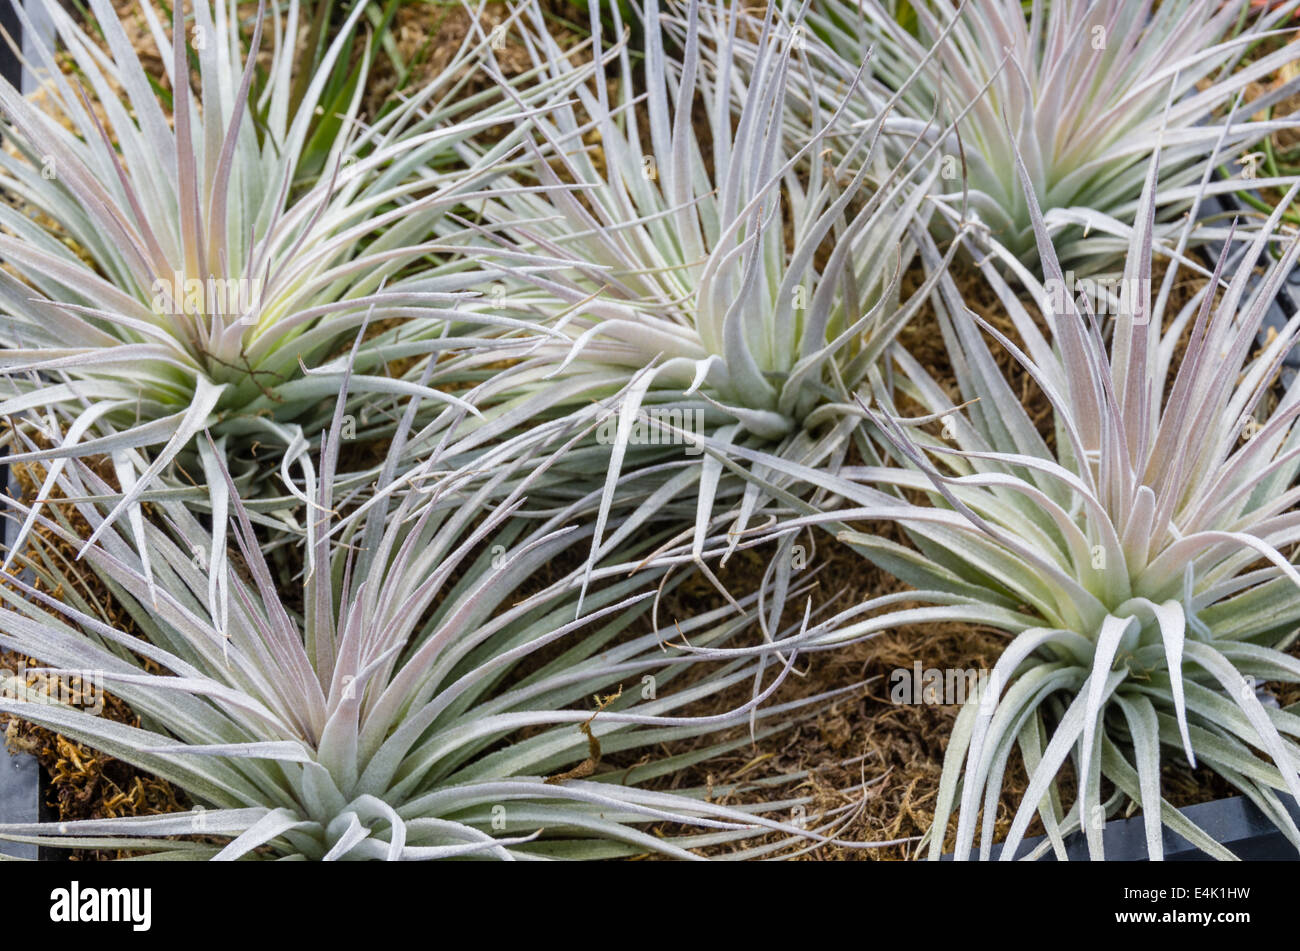 A group of Tillandsia or air plants for sale at the nursery Stock Photo